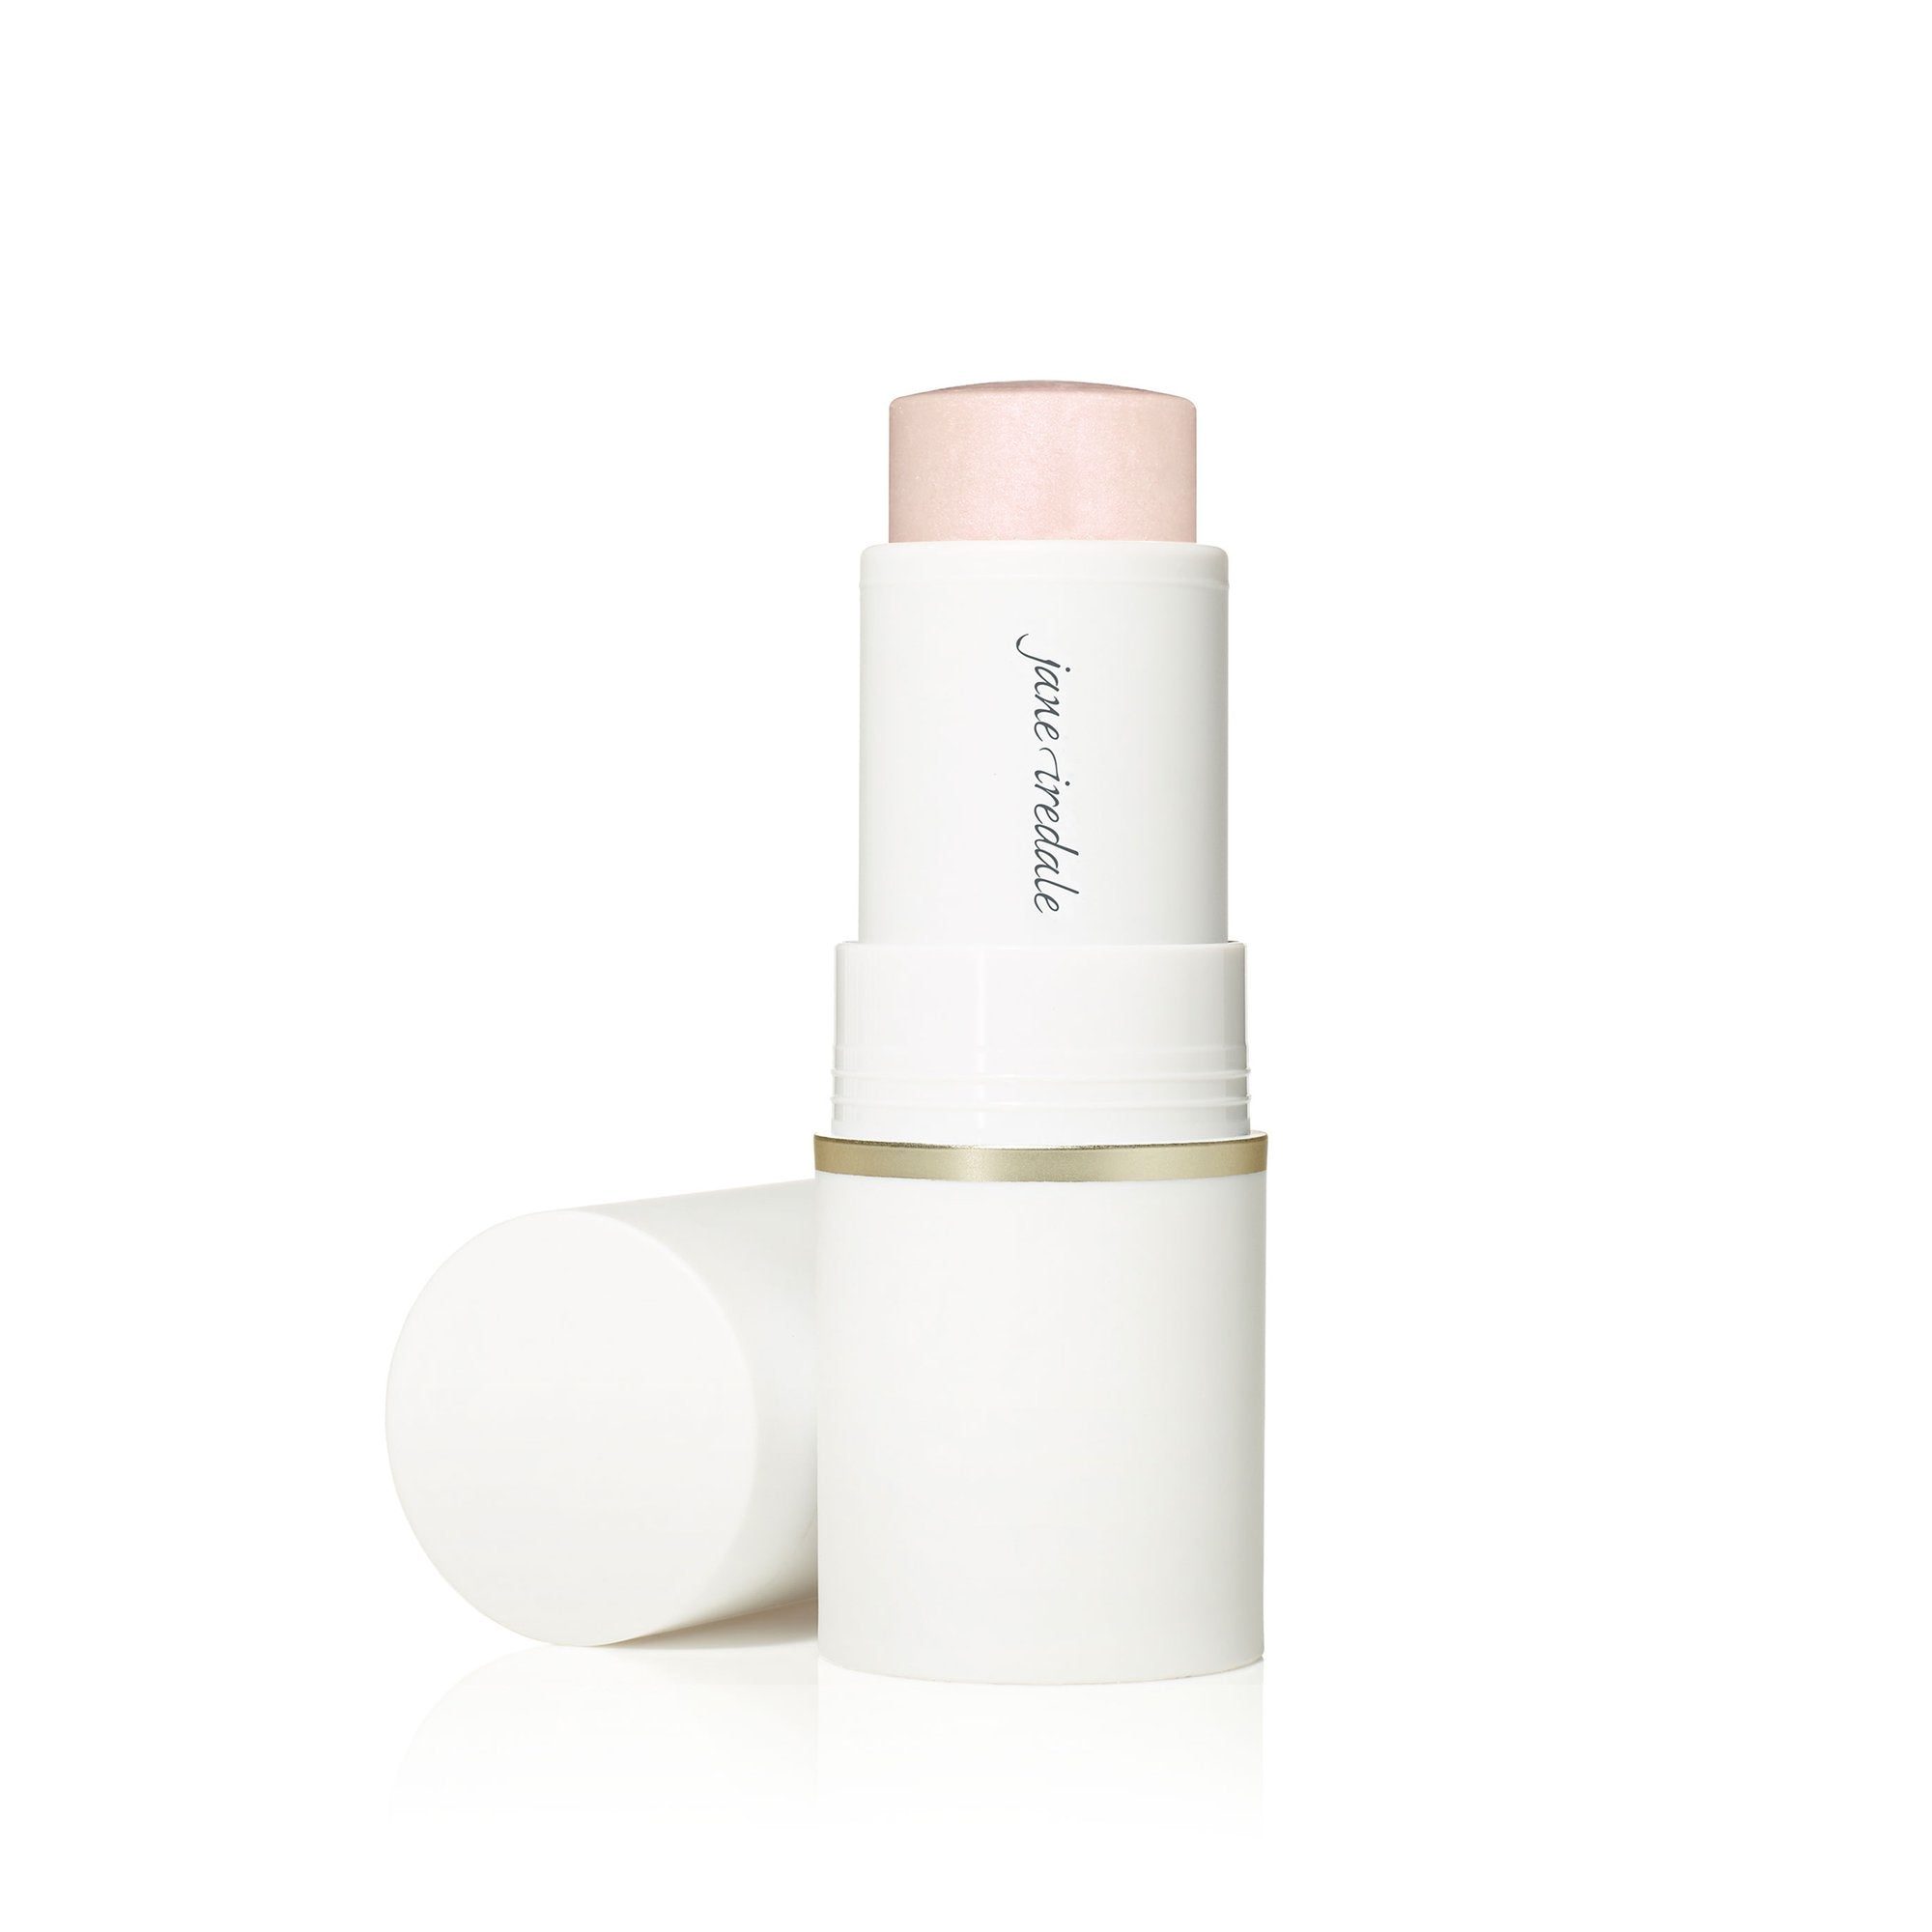 Glow Time? Highlighter Stick - Jane Iredale?